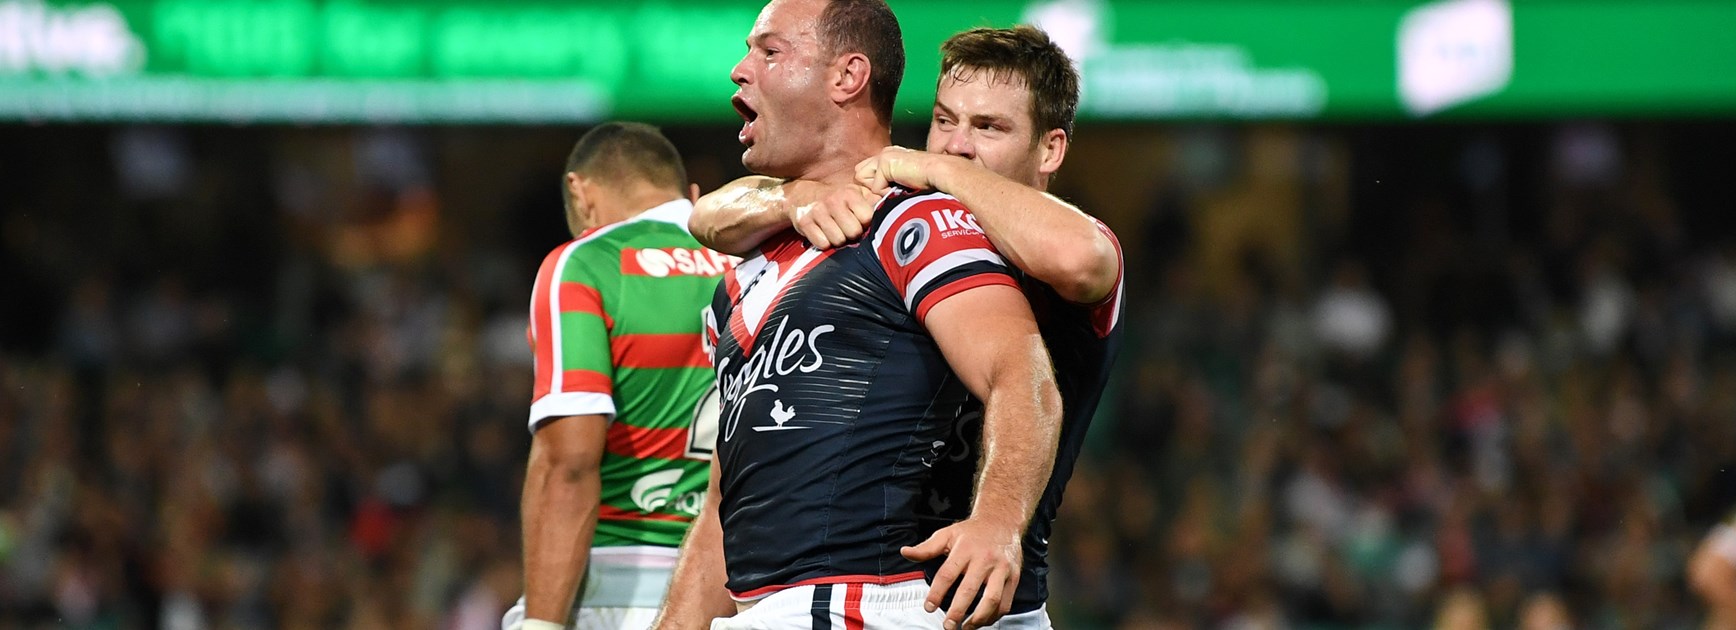 Friday Night Footy | Roosters V Rabbitohs QF 2019